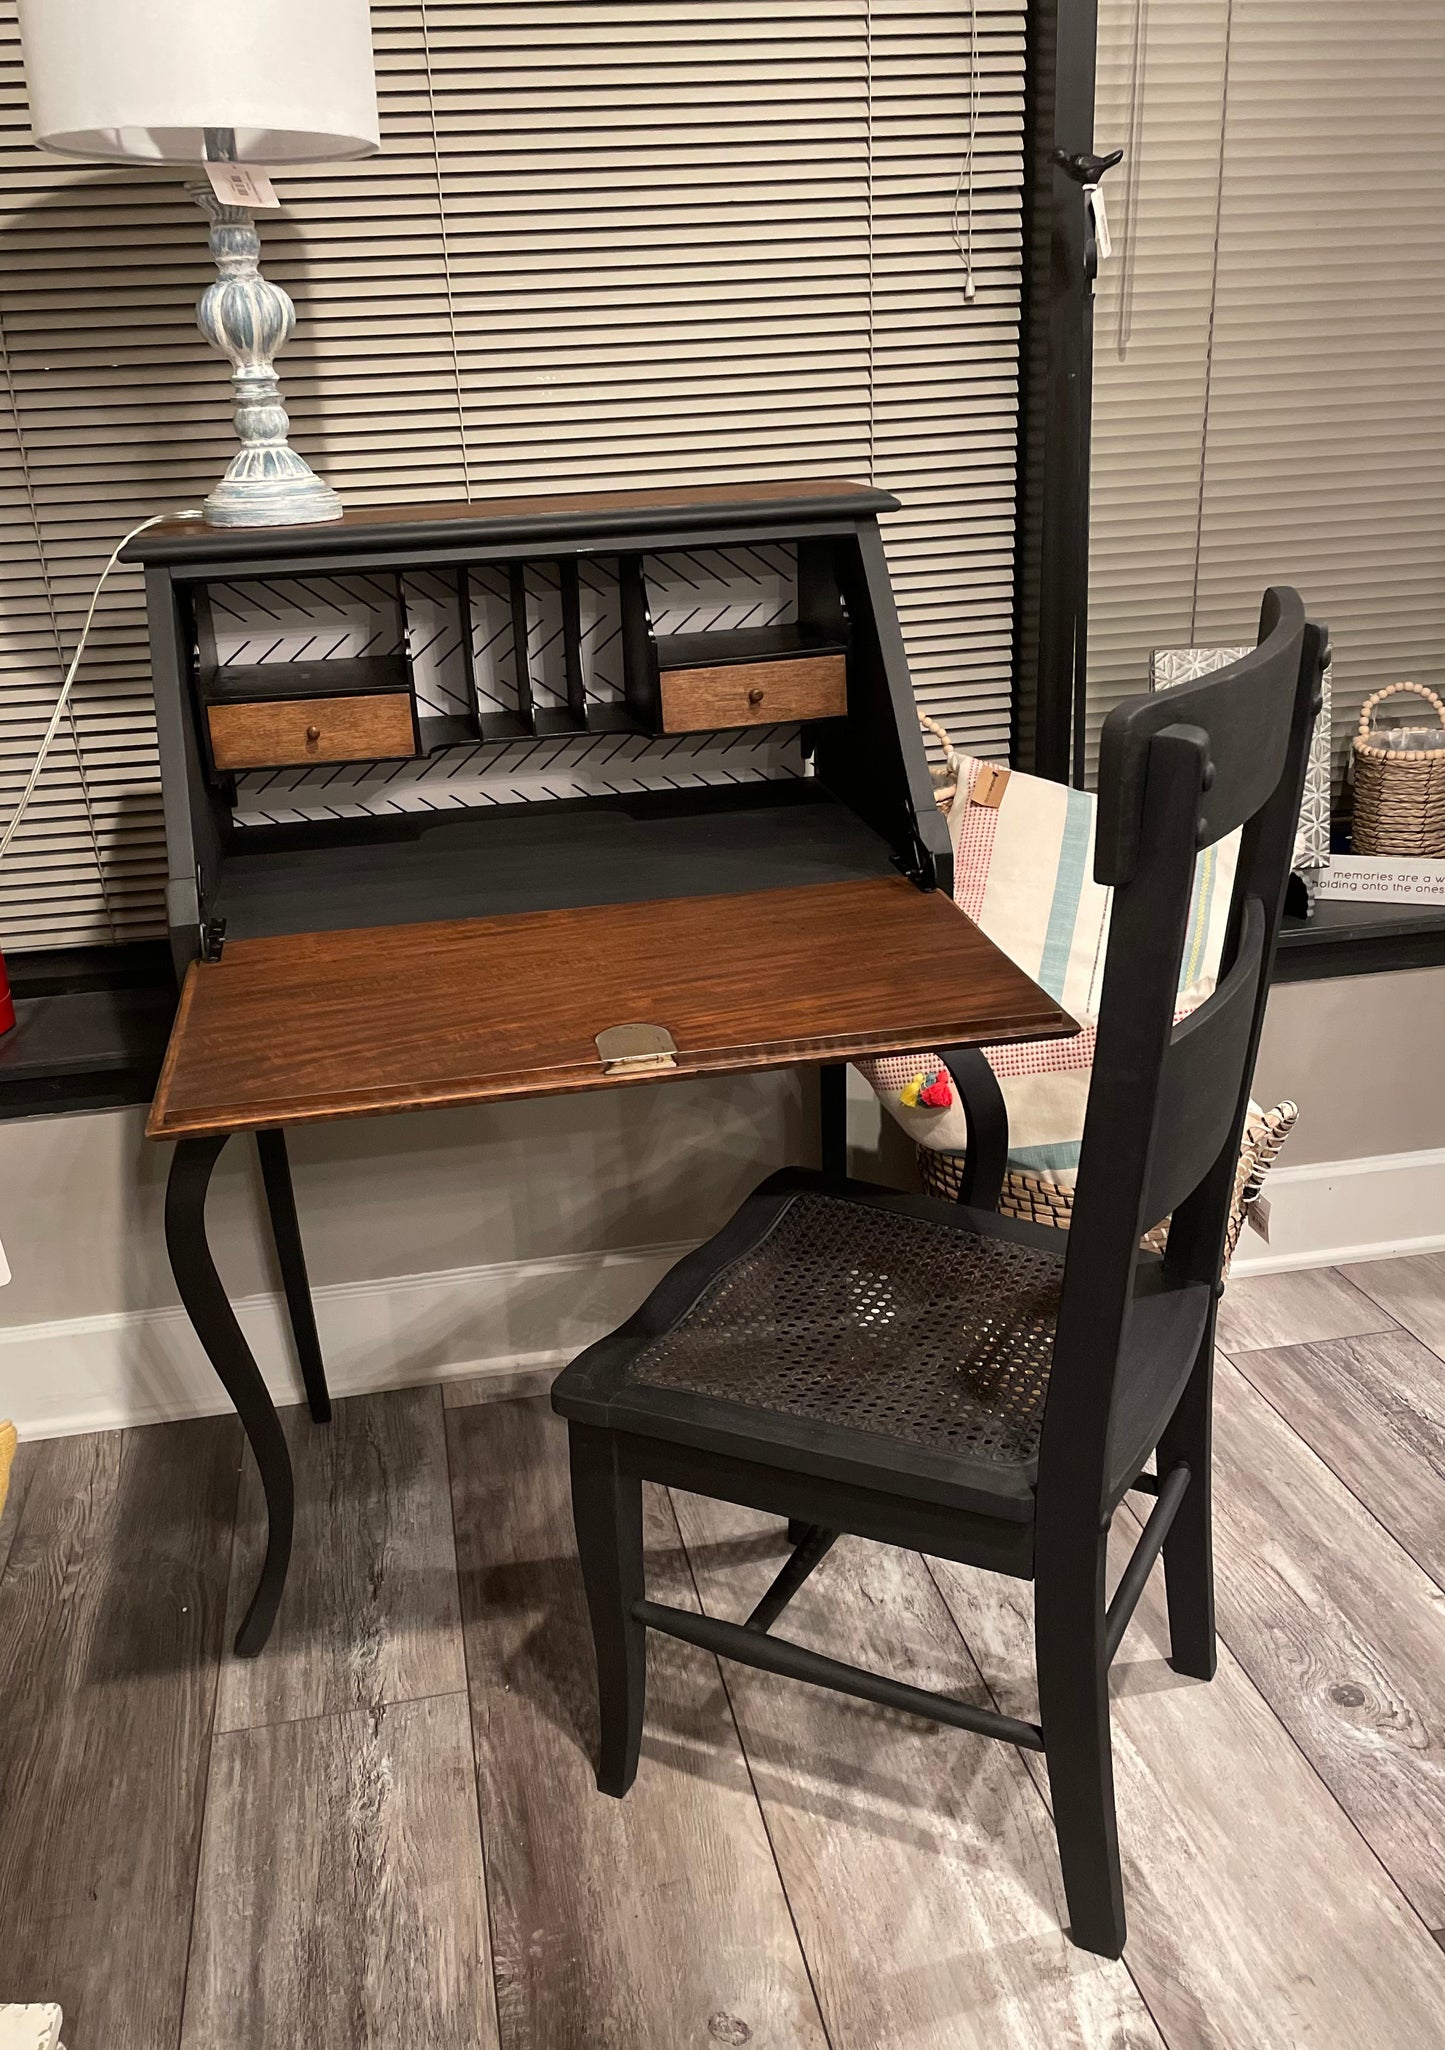 Antique desk with chair